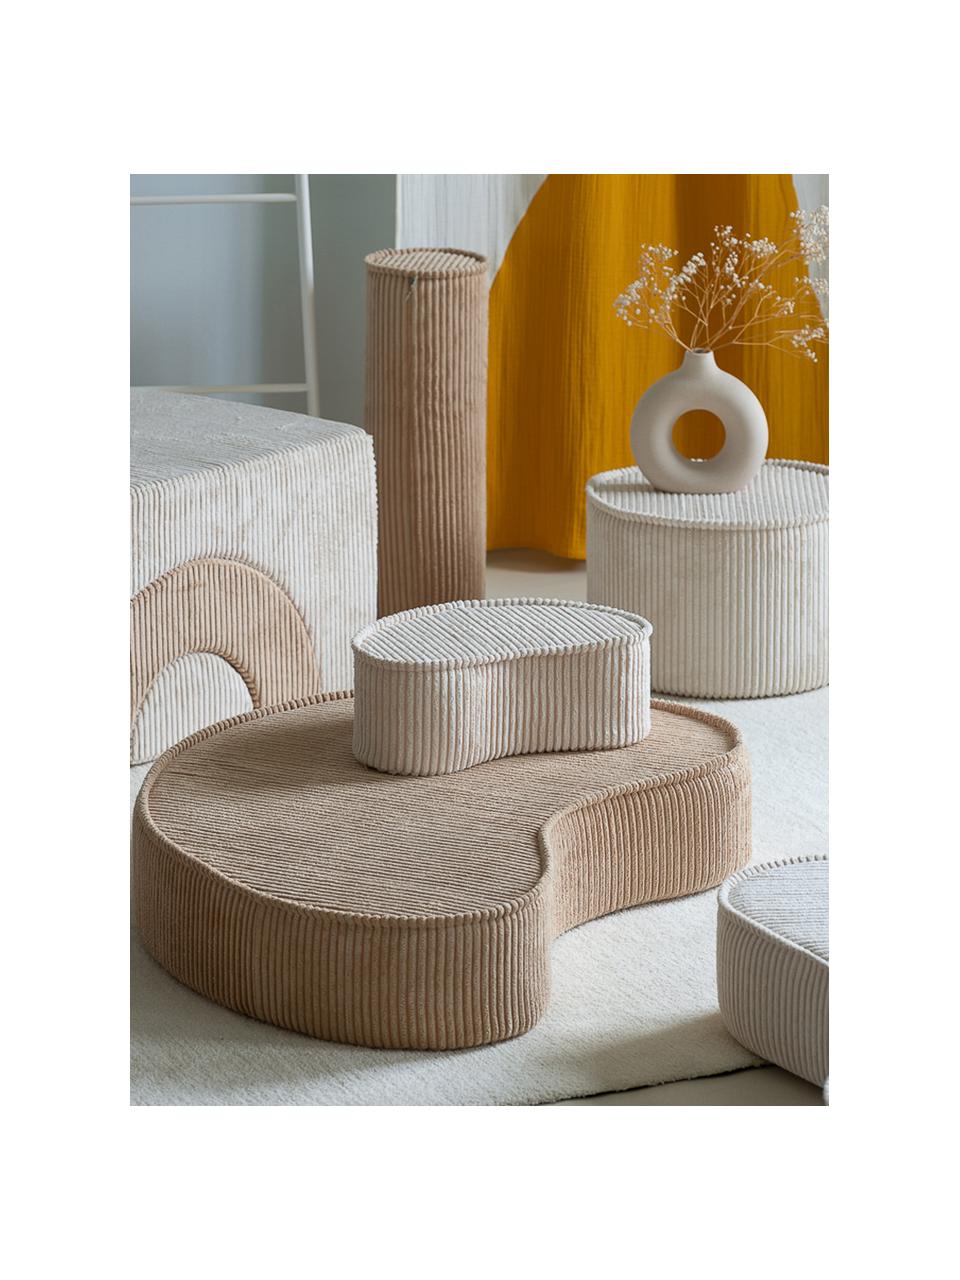 Pouf per bambini in velluto a coste Beans, Rivestimento: velluto a coste (100% pol, Velluto a coste beige, Larg. 95 x Prof. 78 cm